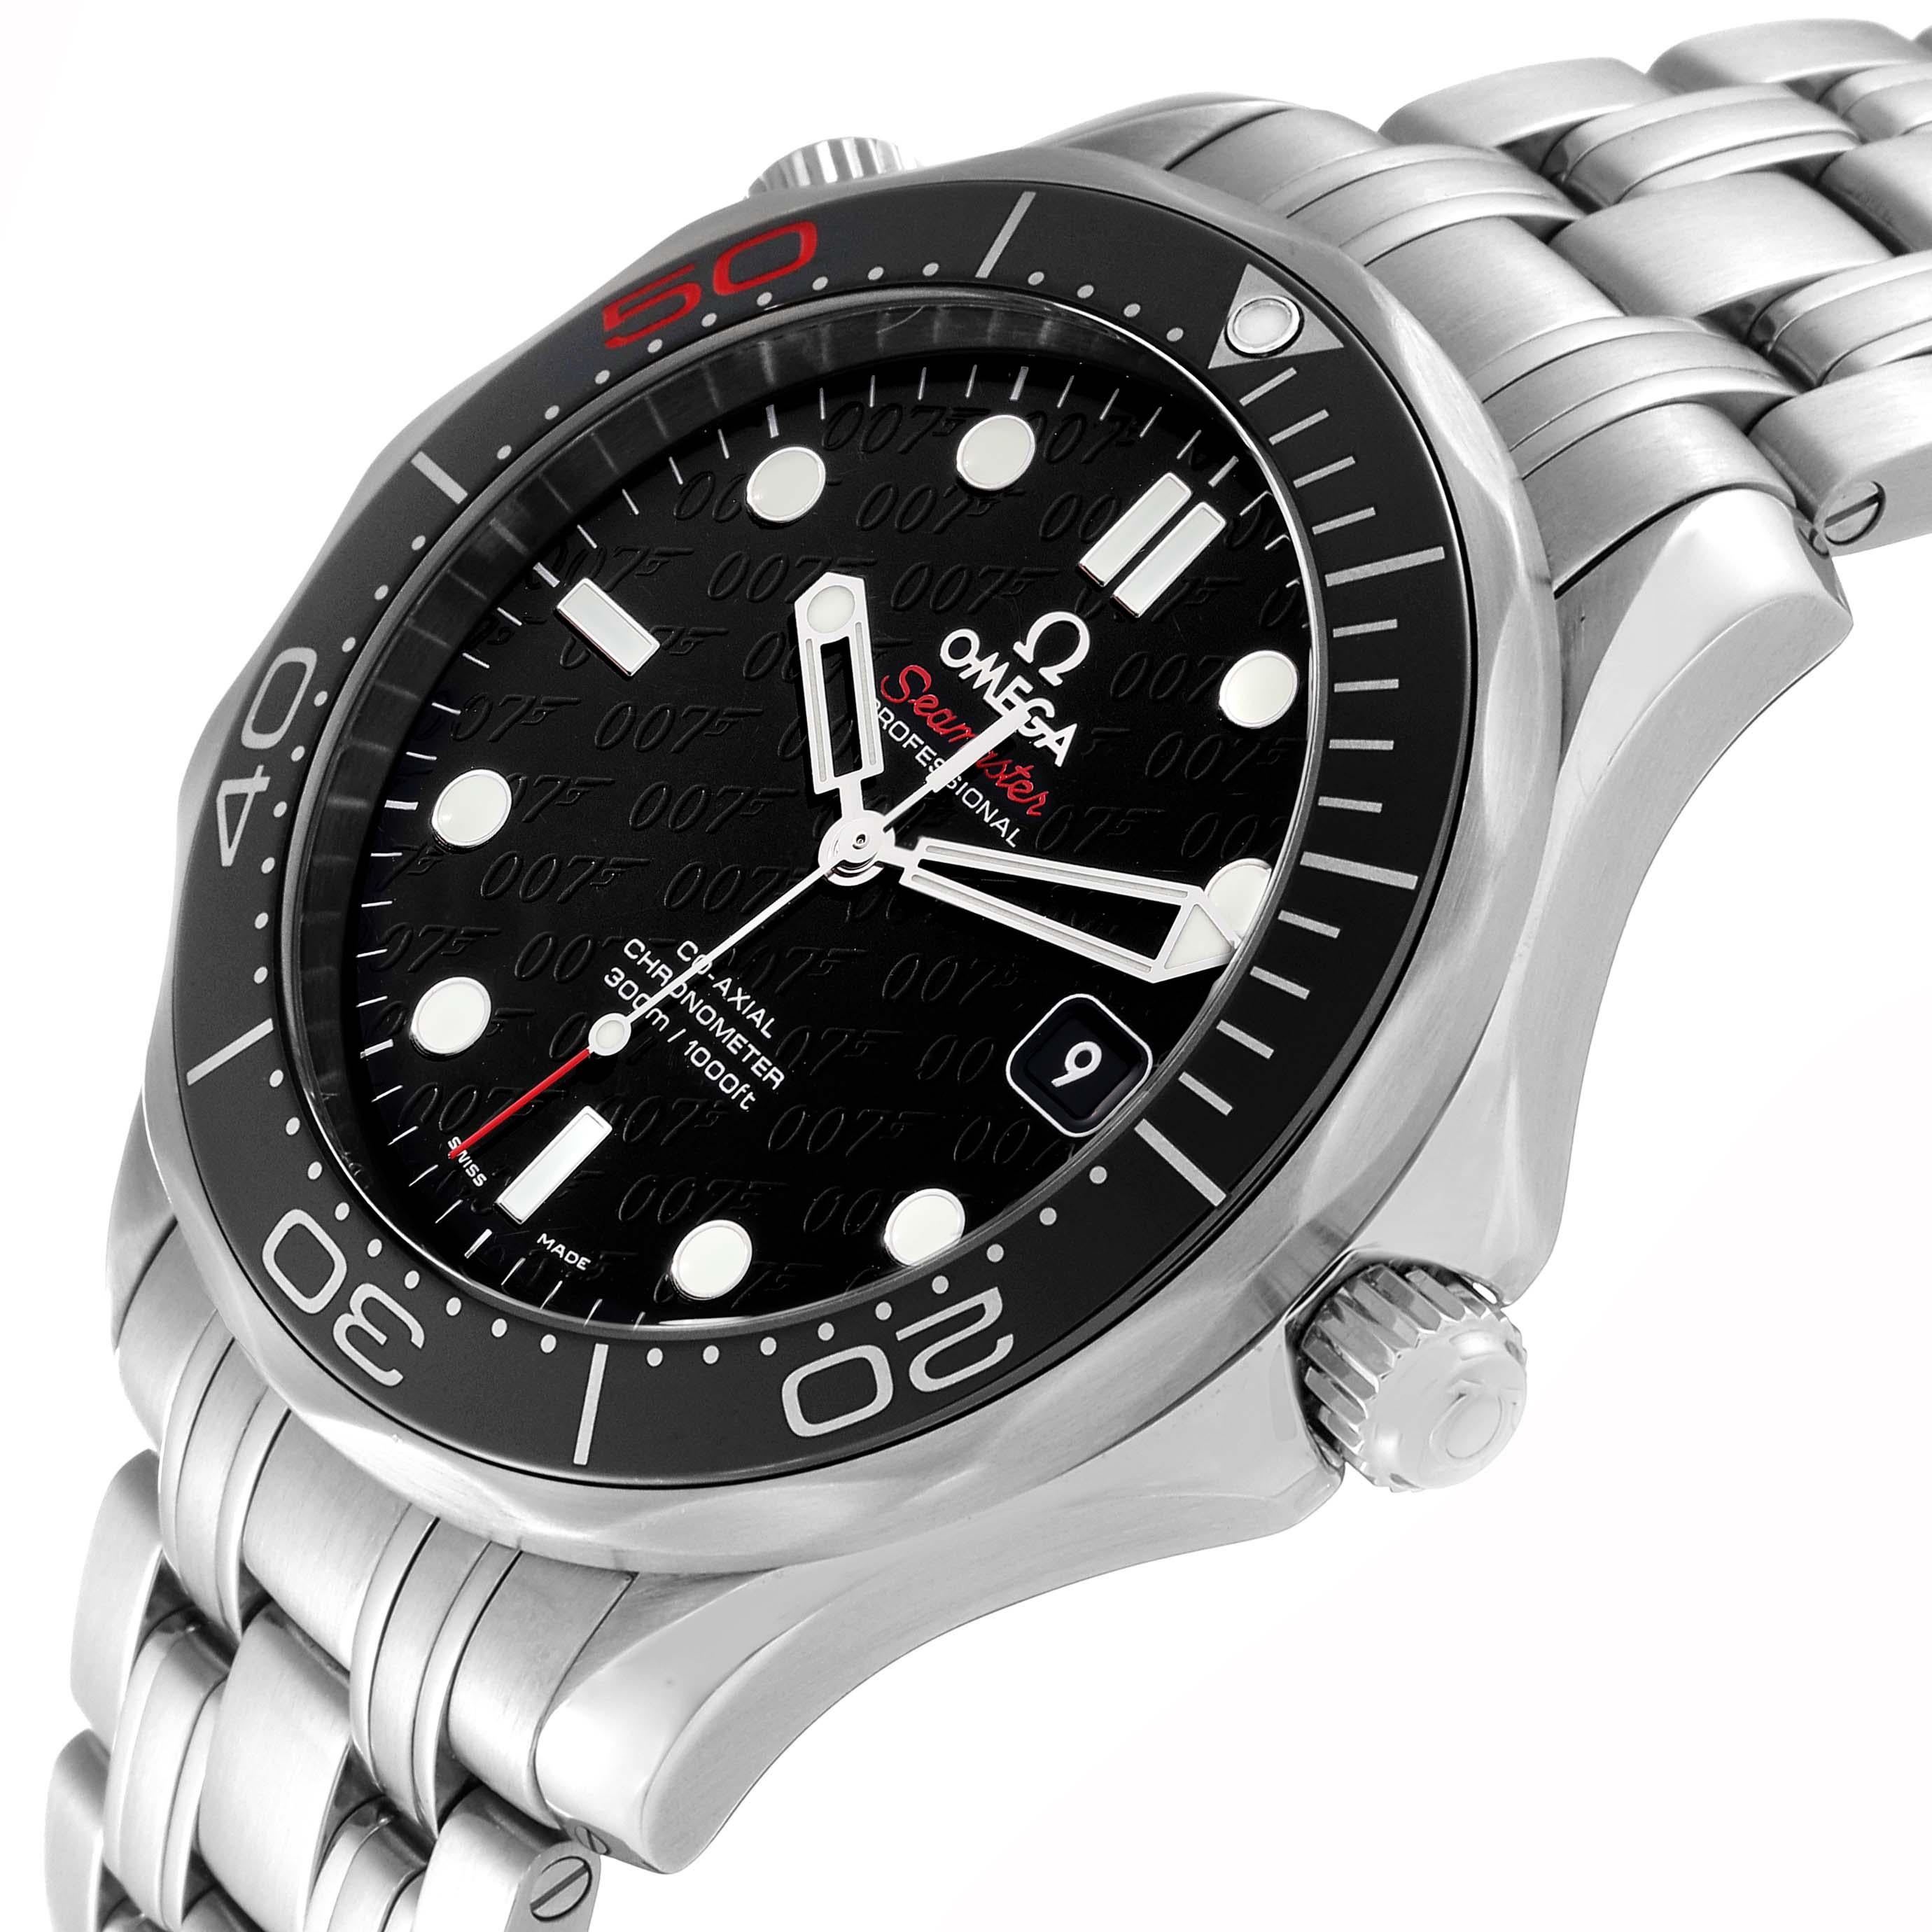 Omega Seamaster Limited Edition Bond 007 Steel Mens Watch 212.30.41.20.01.005 For Sale 2